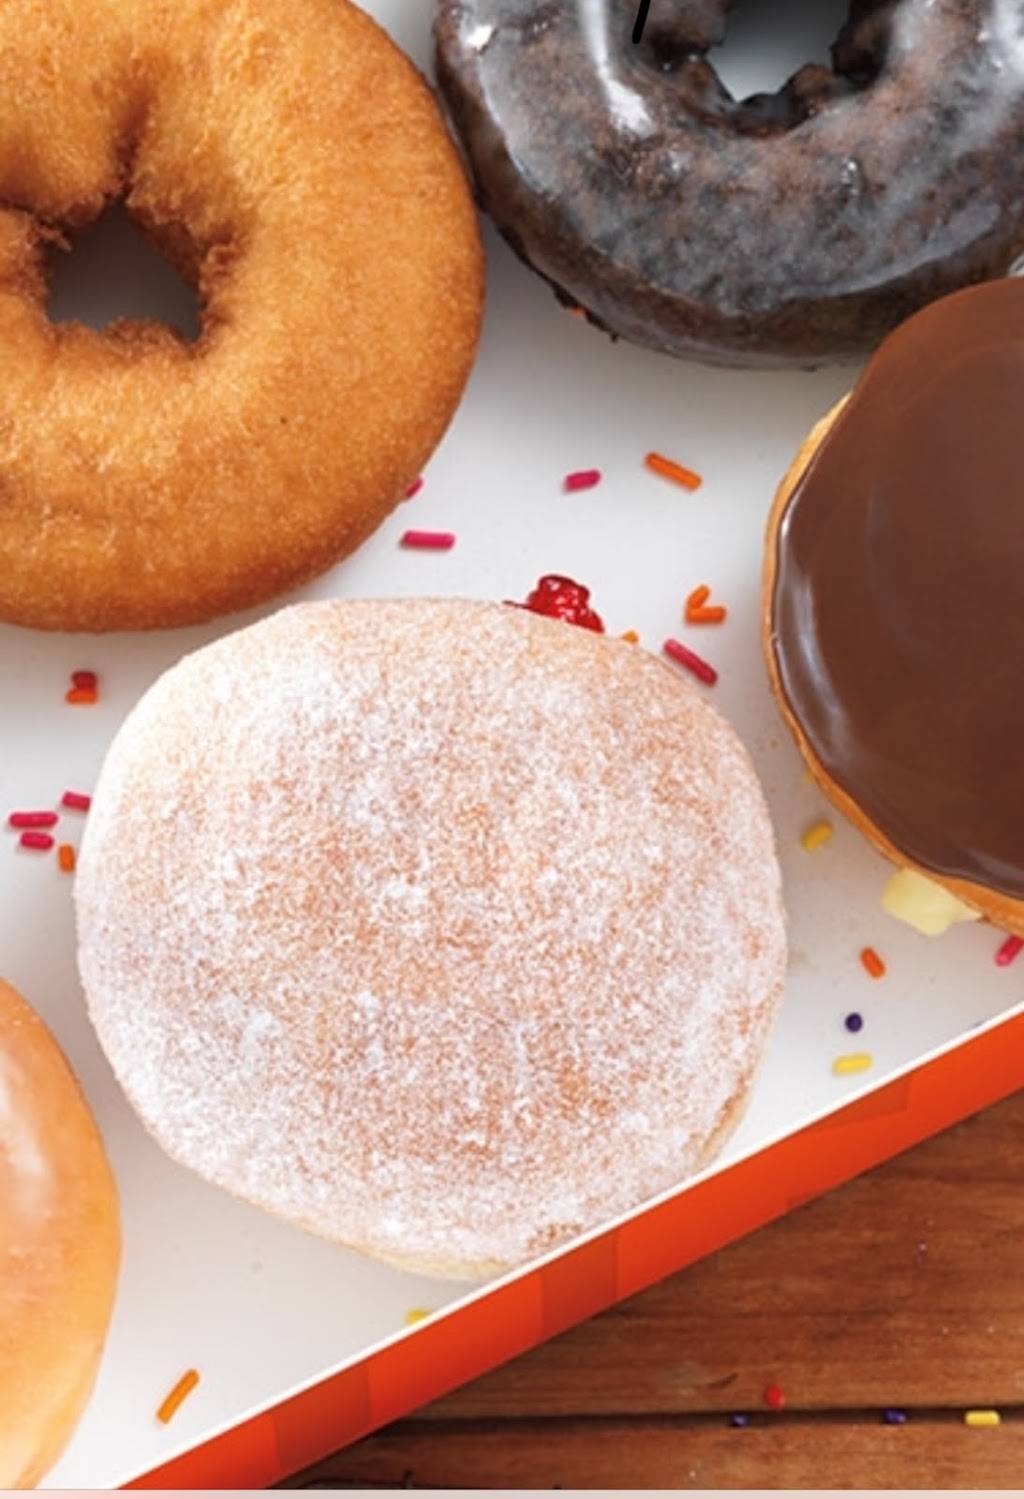 Dunkin | bakery | 6923 Post Rd, North Kingstown, RI 02852, USA | 4018851127 OR +1 401-885-1127